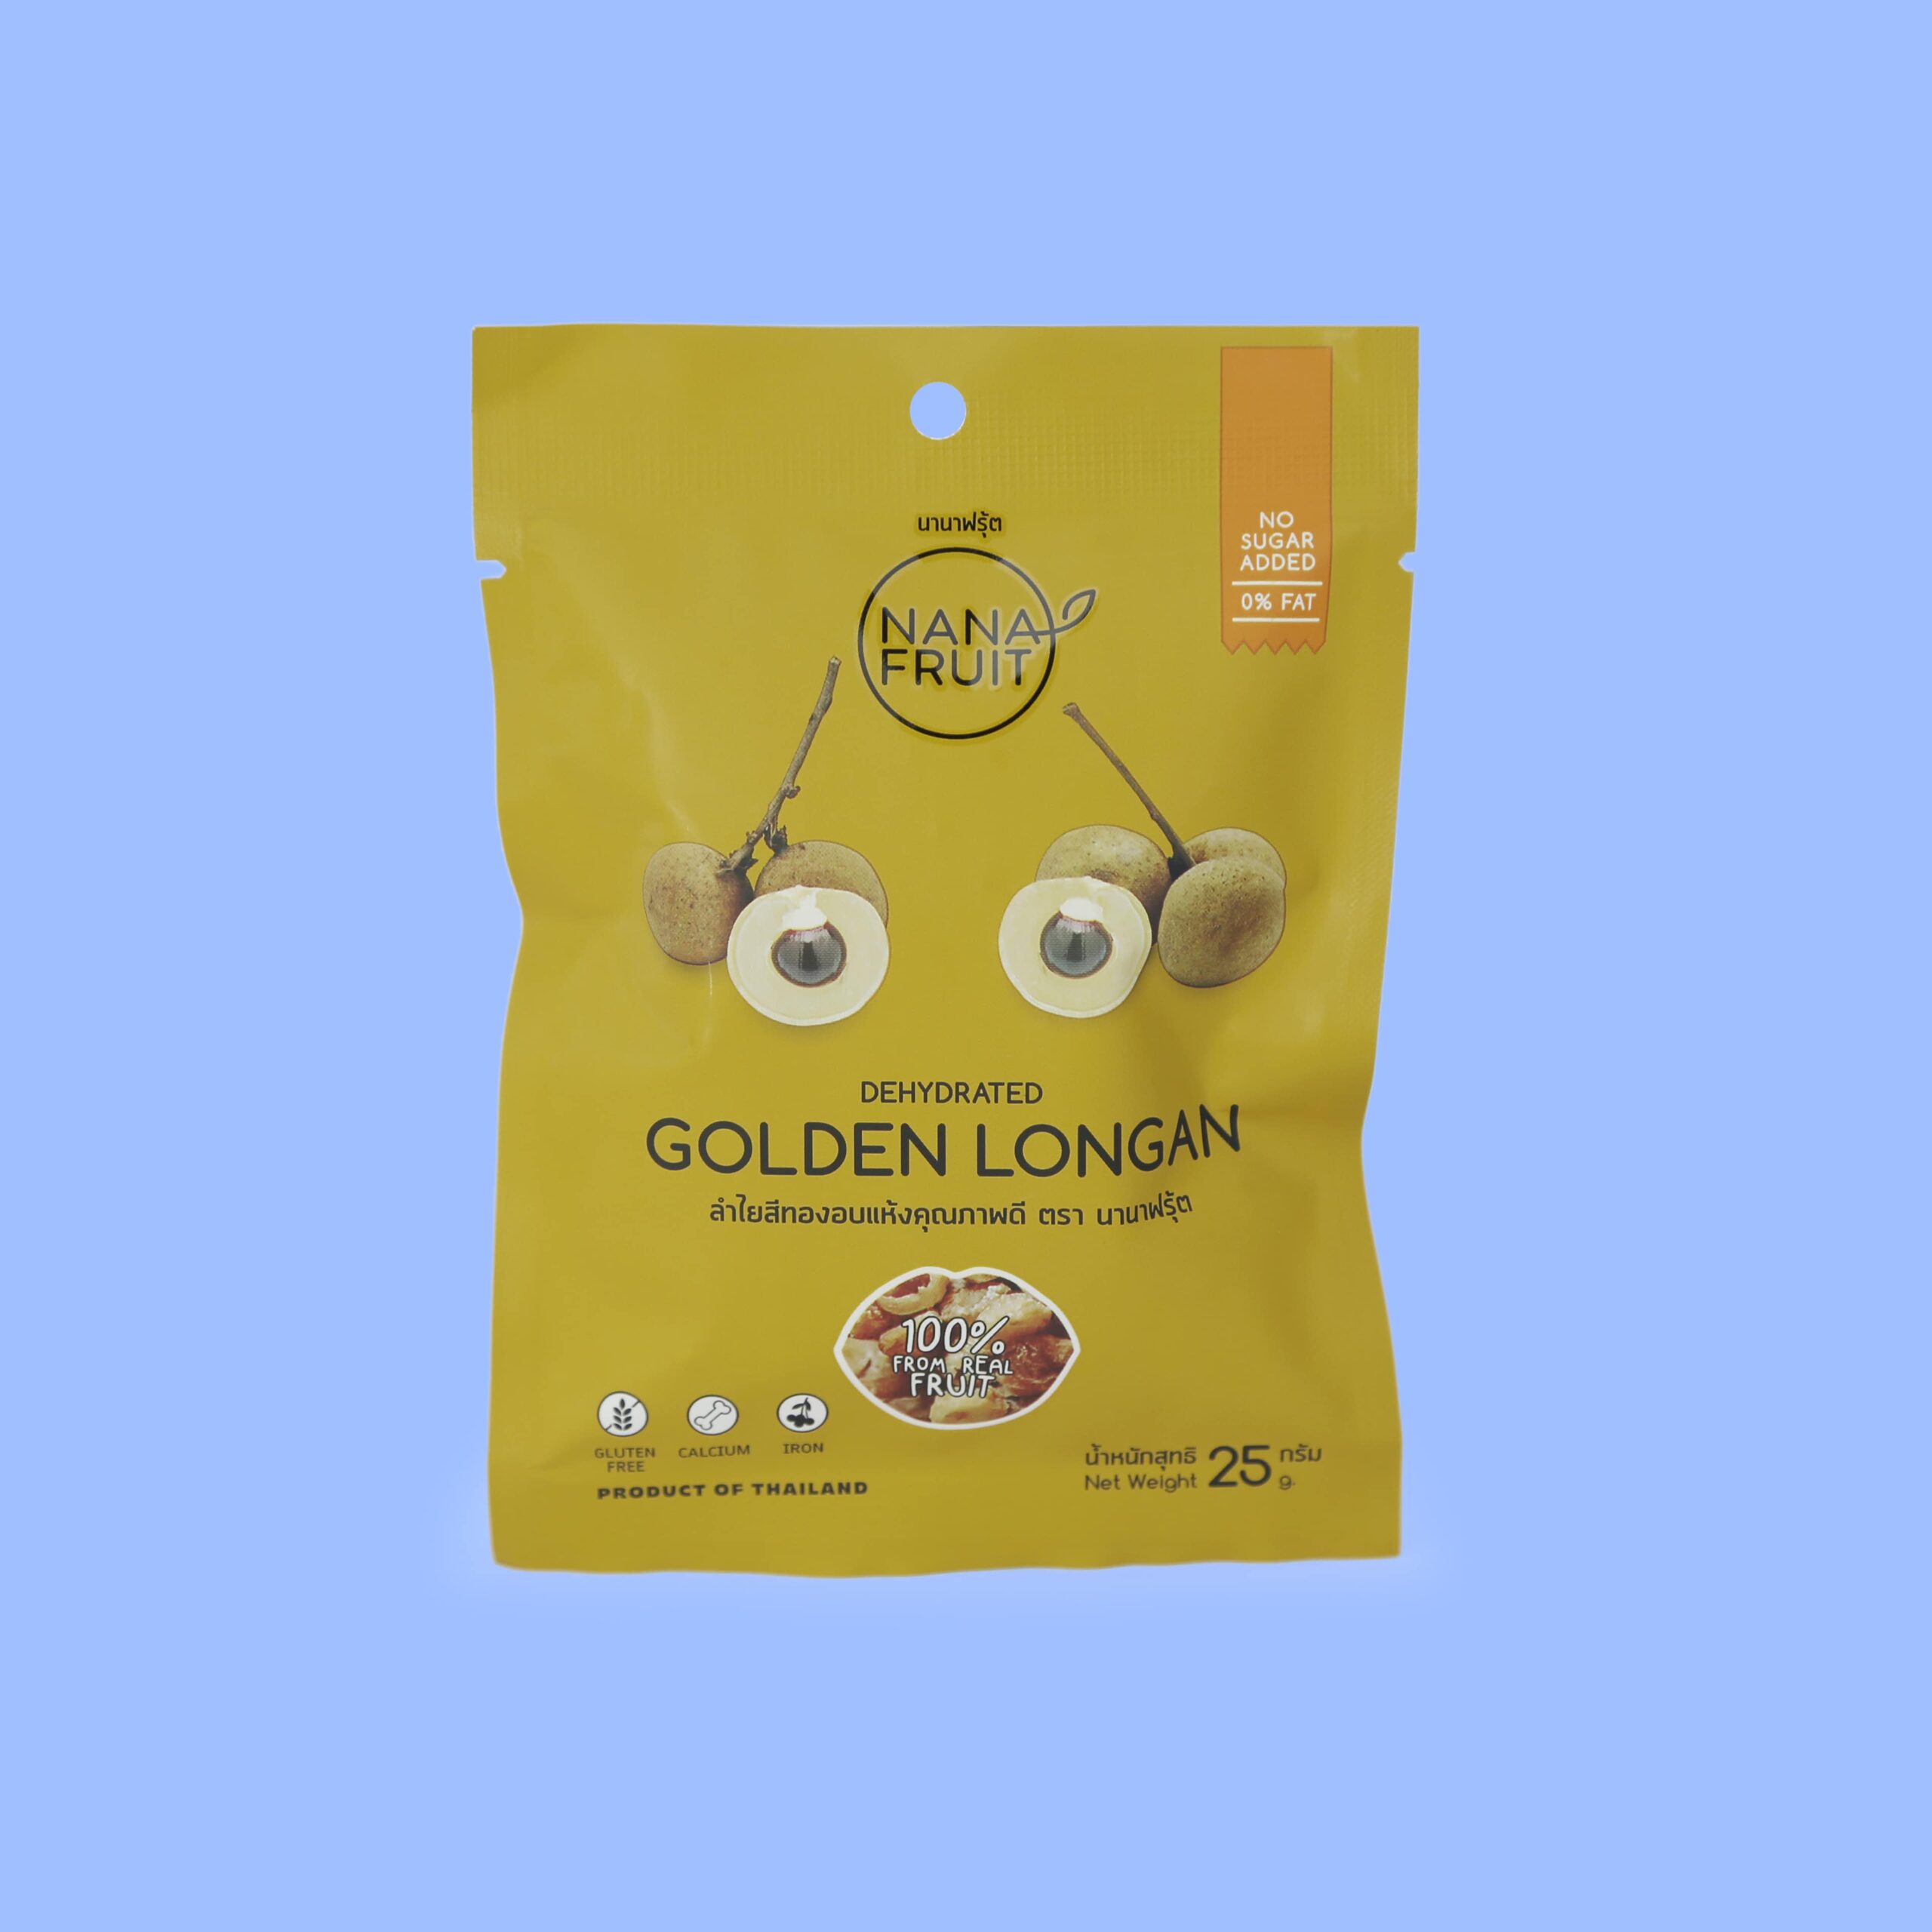 Nana fruit Dehydrated golden longan. Product of Thailand featured in Heap Brand Thai snack subscription box